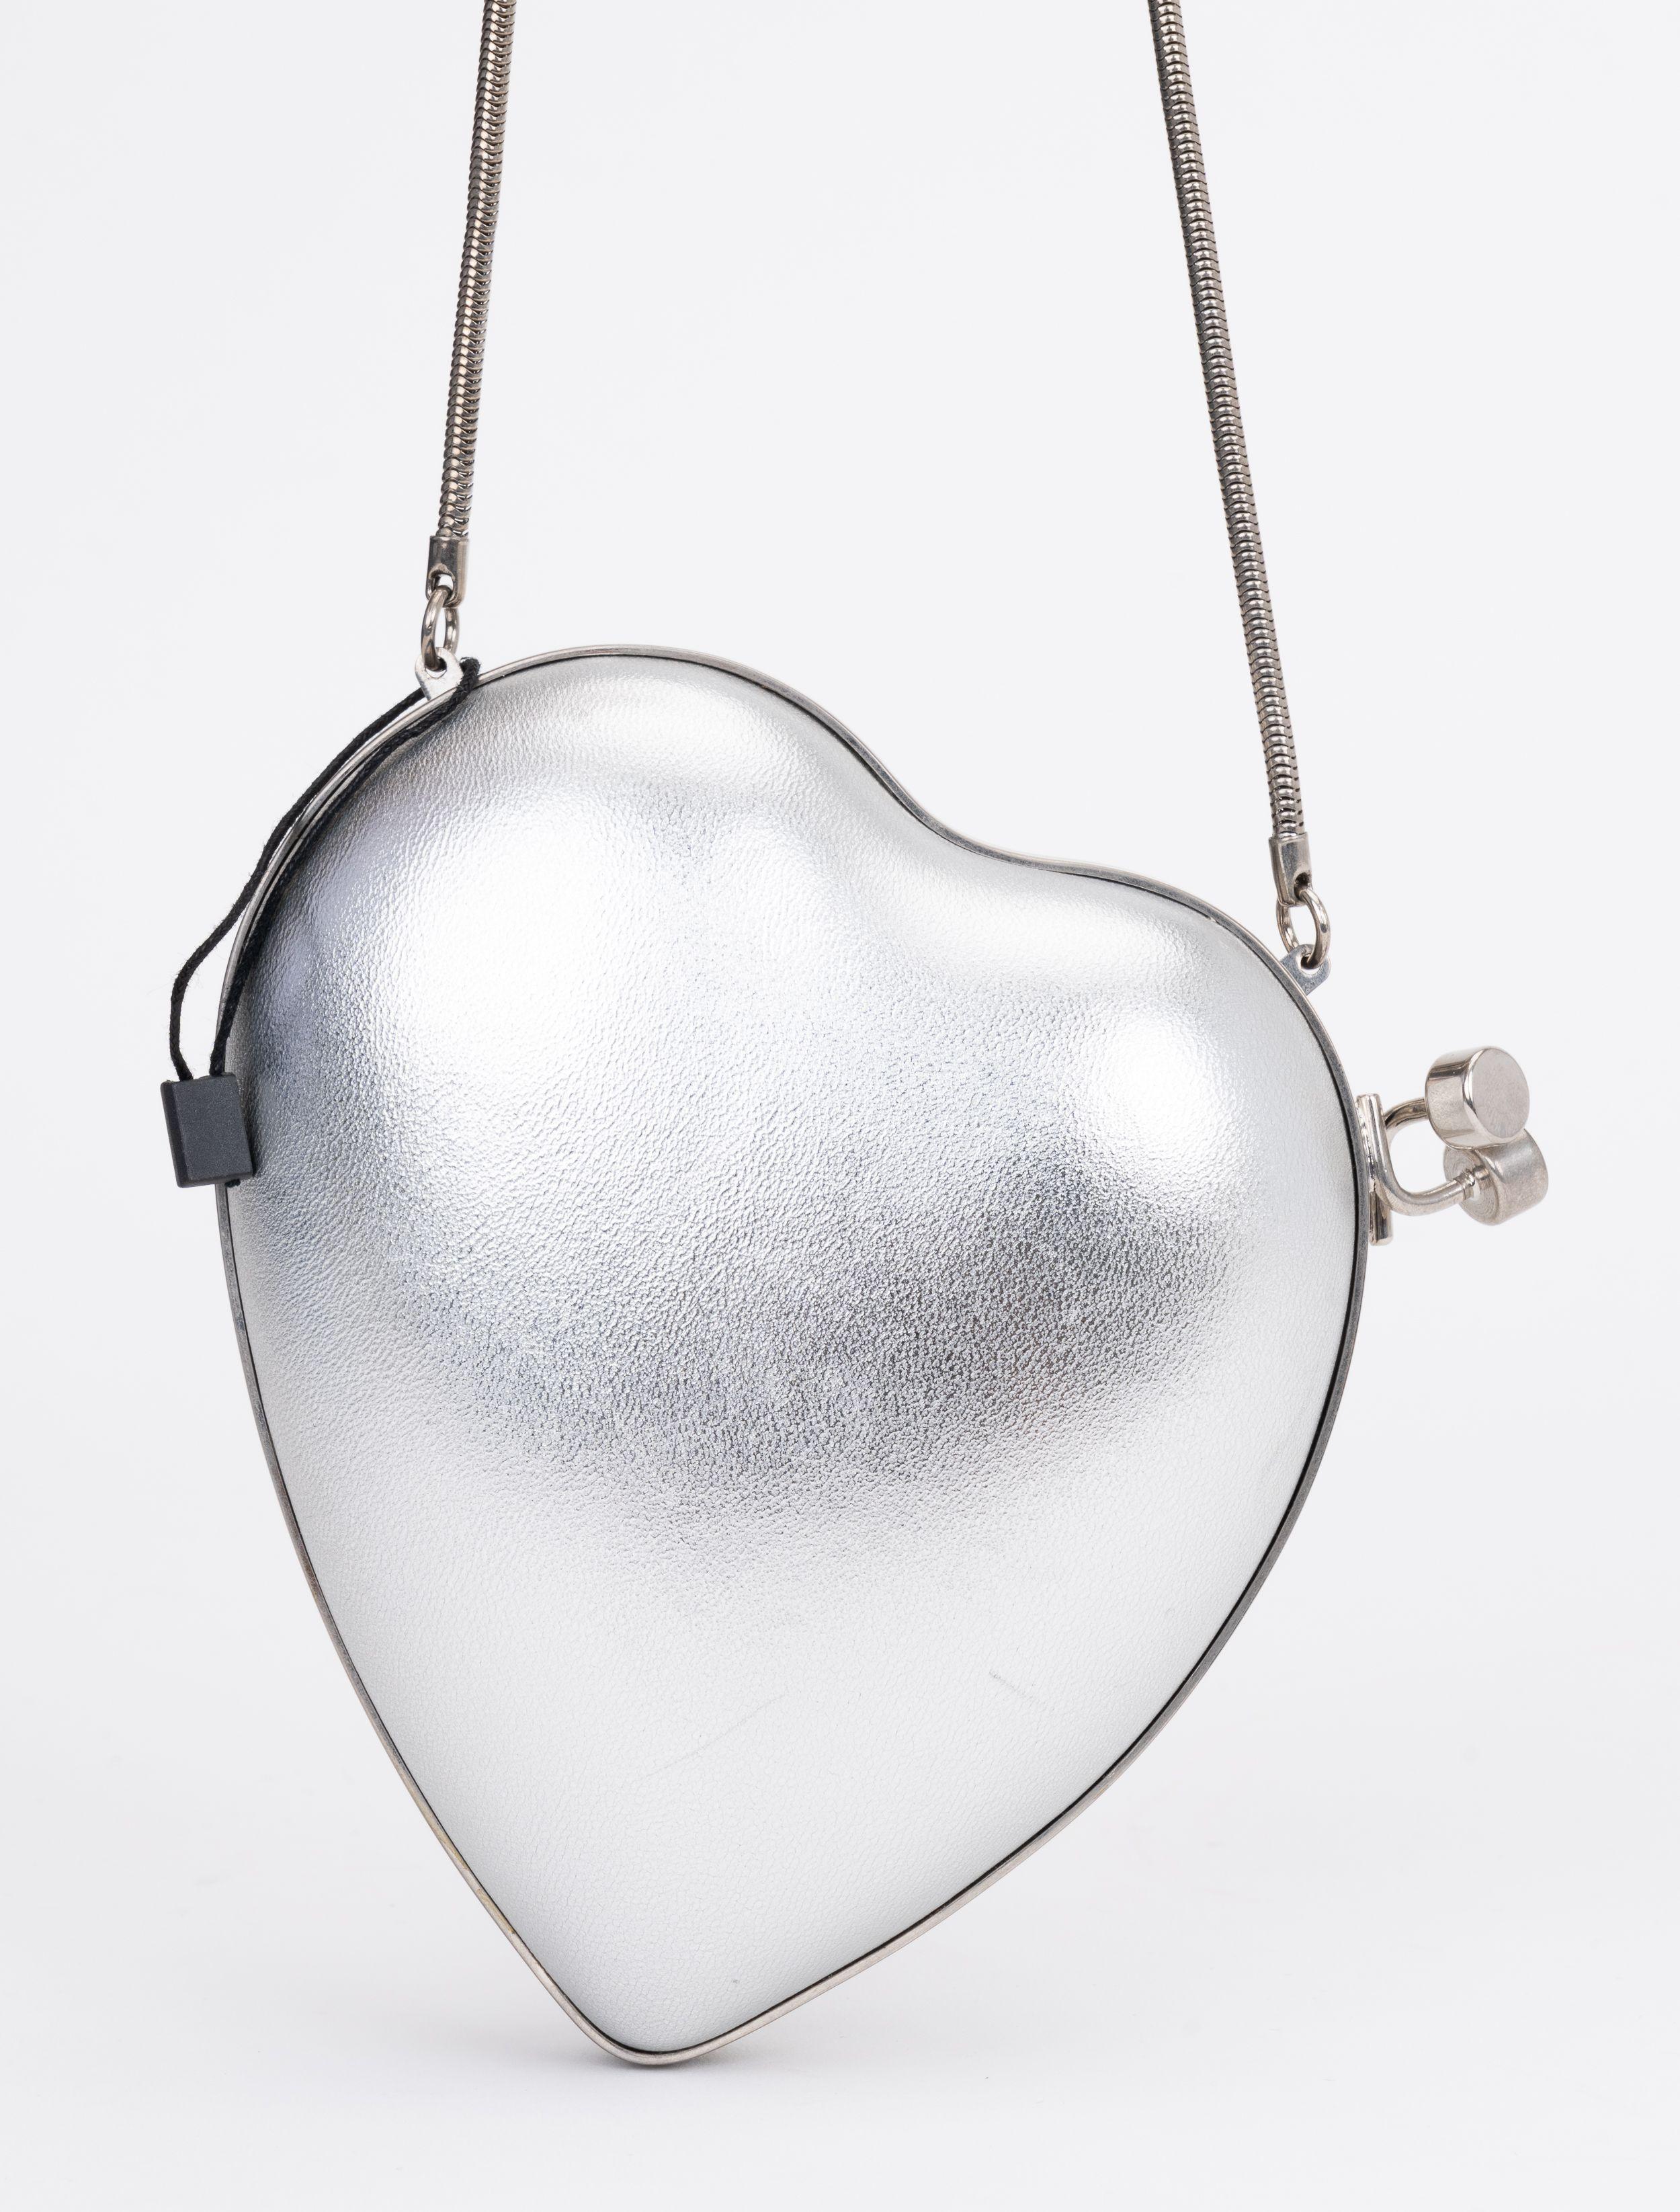 YSL New Silver Mini Heart Evening Bag In New Condition For Sale In West Hollywood, CA